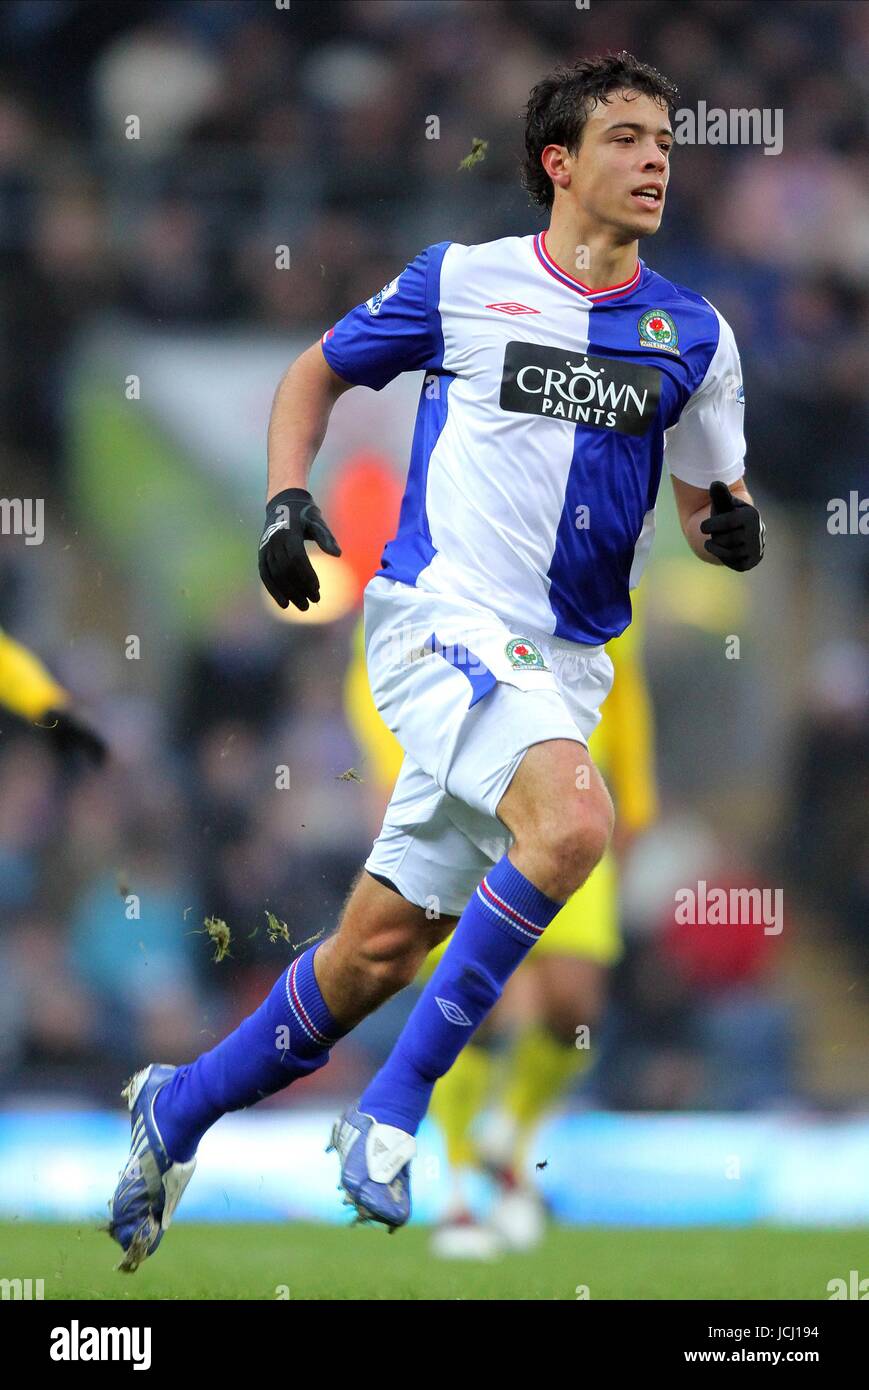 FRANCO DI SANTO BLACKBURN ROVERS FC BLACKBURN ROVERS V TOTTENHAM EWOOD PARK, BLACKBURN, ENGLAND 19 December 2009 GAB6532     WARNING! This Photograph May Only Be Used For Newspaper And/Or Magazine Editorial Purposes. May Not Be Used For, Internet/Online Usage Nor For Publications Involving 1 player, 1 Club Or 1 Competition, Without Written Authorisation From Football DataCo Ltd. For Any Queries, Please Contact Football DataCo Ltd on +44 (0) 207 864 9121 Stock Photo